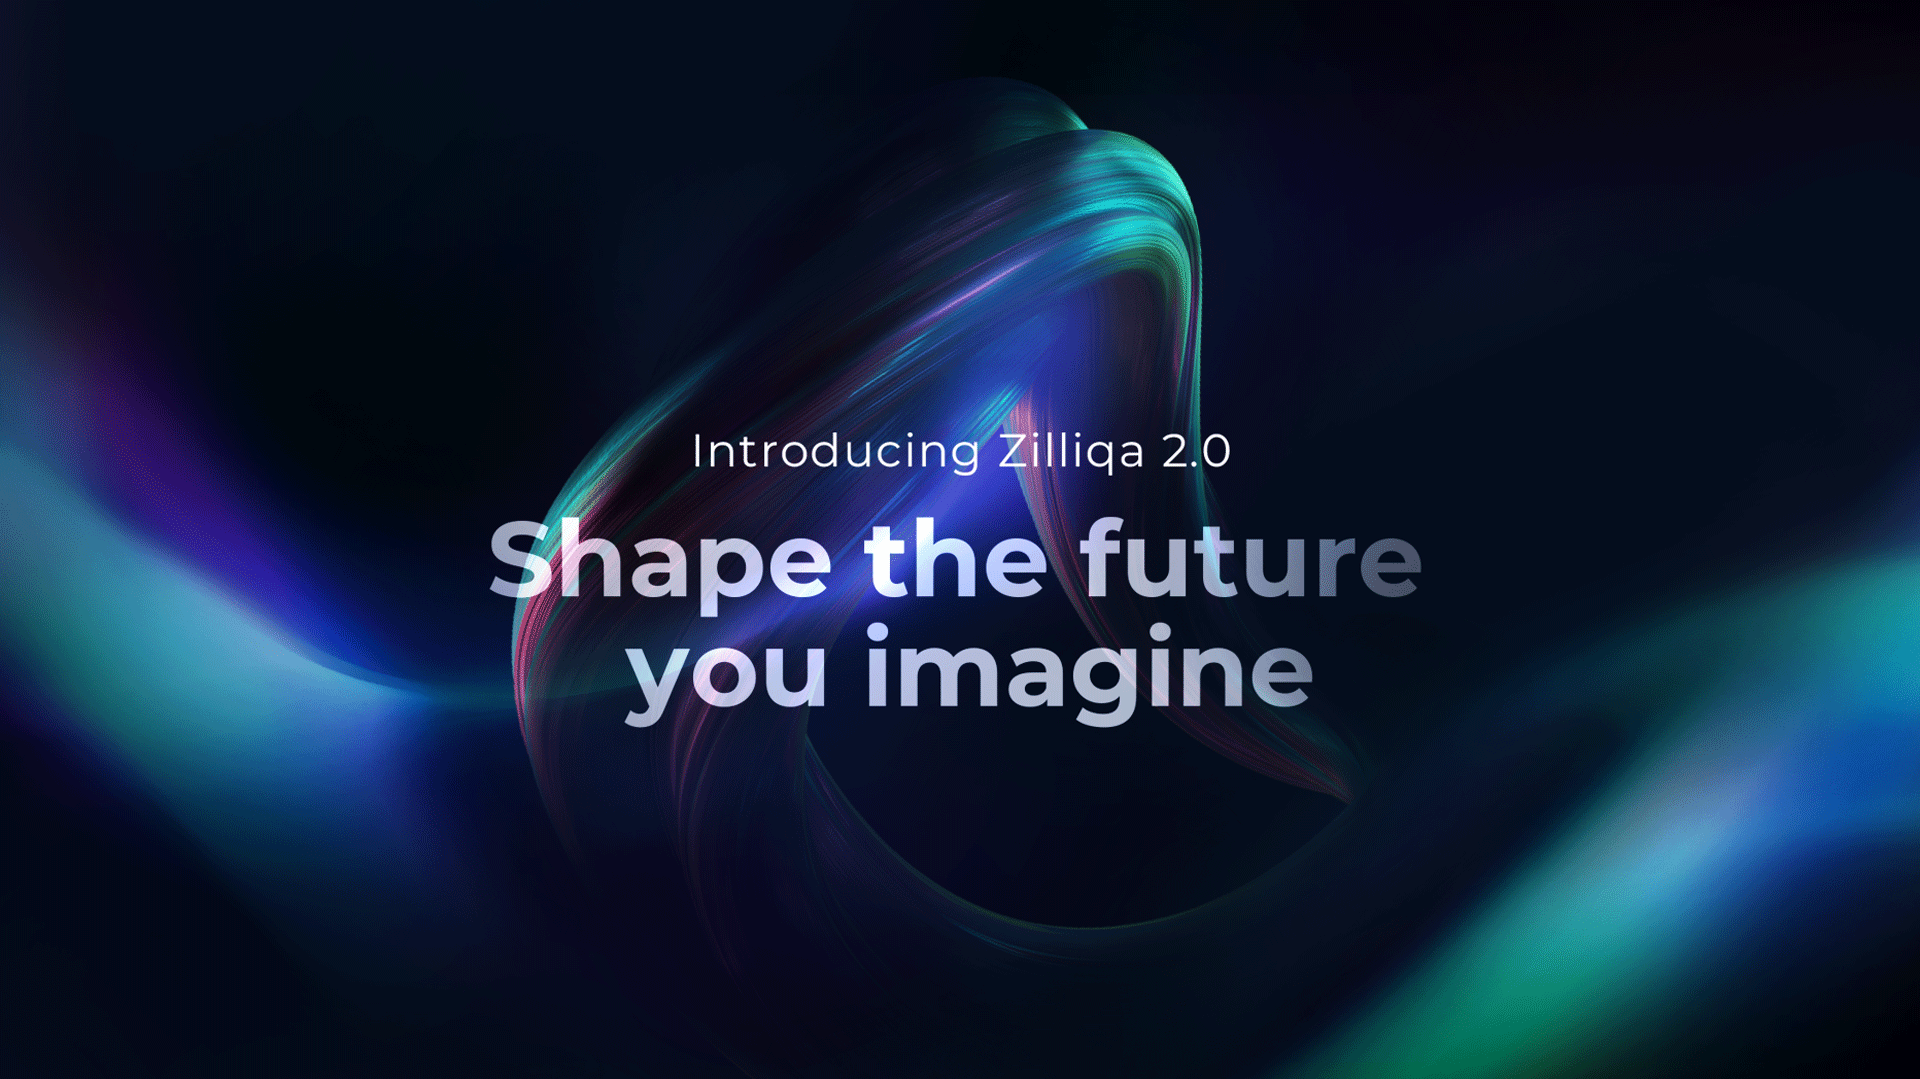 Introducing Zilliqa 2.0 - Shaping a Decentralised Future